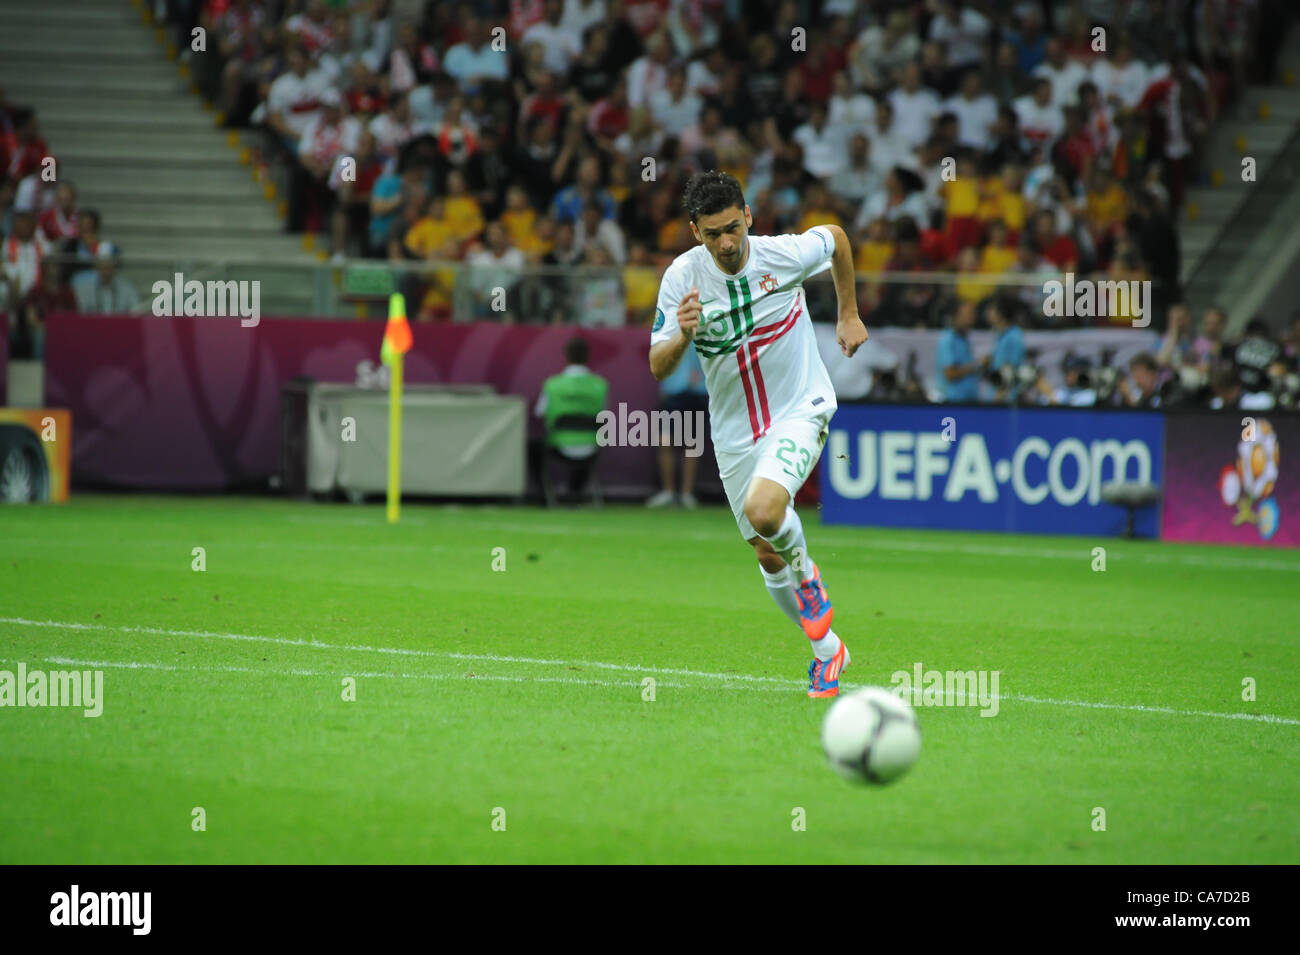 21.06.2012 , Gdansk, Poland. Hélder Postiga (Real Zaragoza) in action for Portugal during the European Championship Quarter Final game between Portugal and Czech Republic from the Stadium. Stock Photo